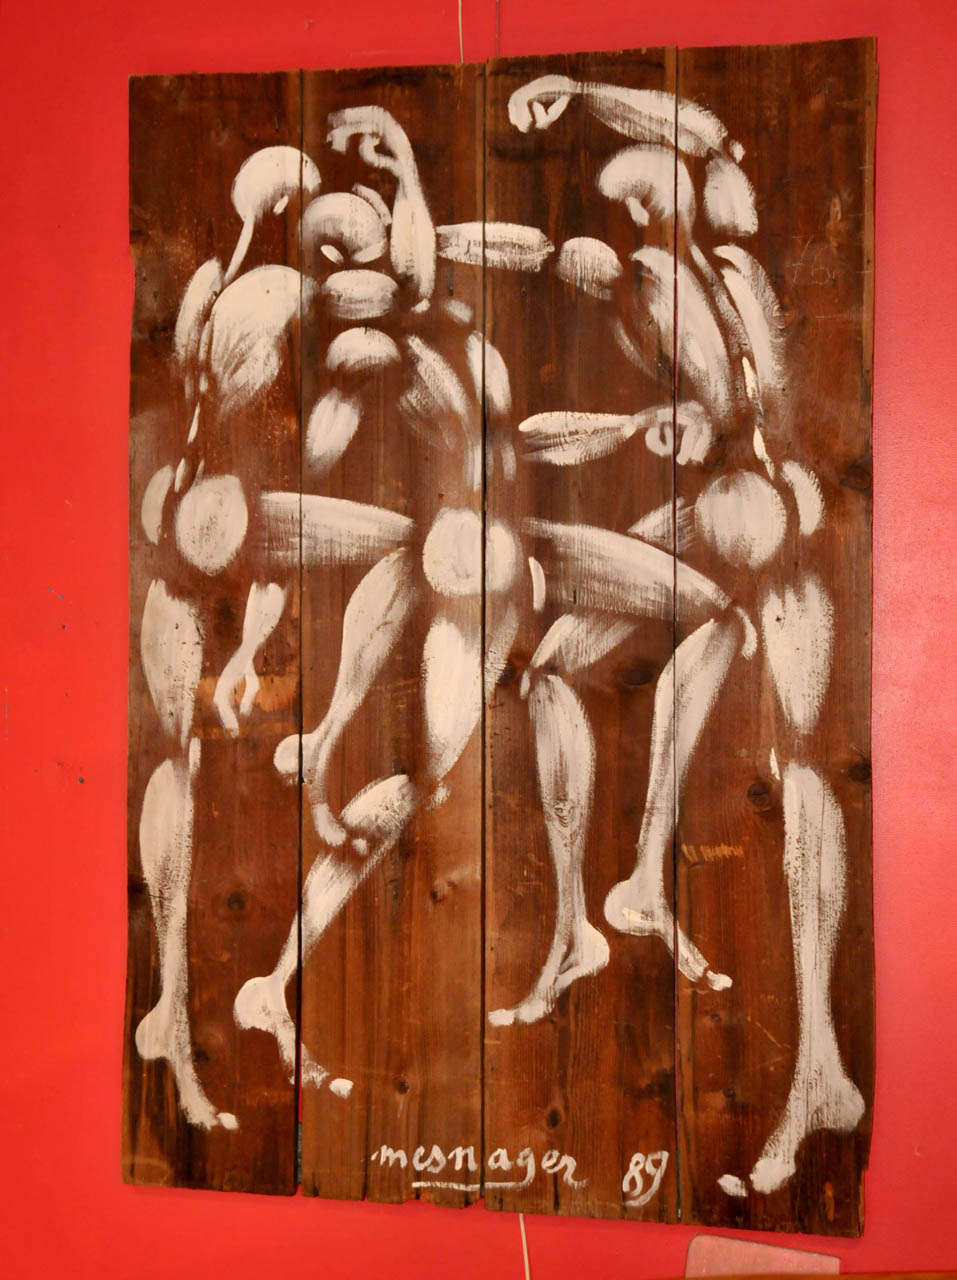 1989 painting on wood 'Le Combat' (The fight) by Mesnager. Very good condition. Normal wear consistent with age and use.